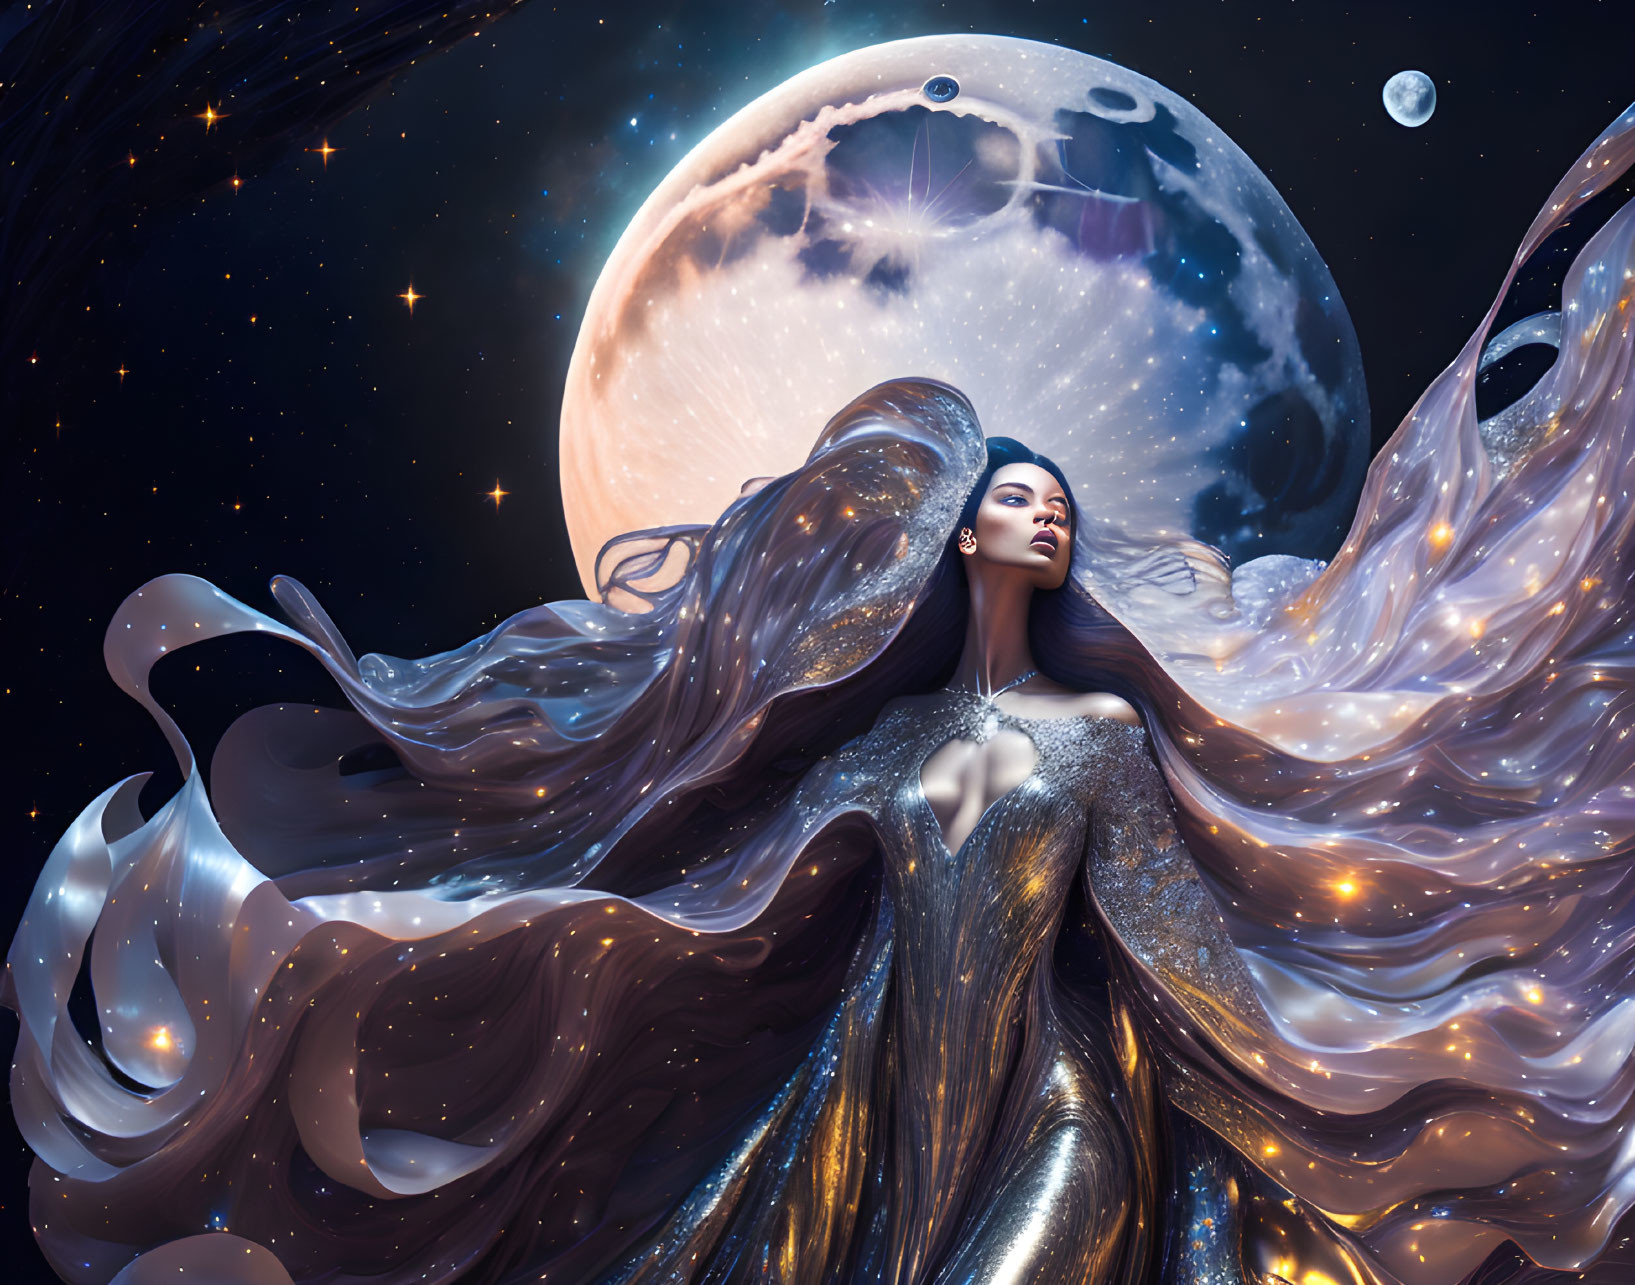 Celestial woman with flowing hair and gown in cosmic scene